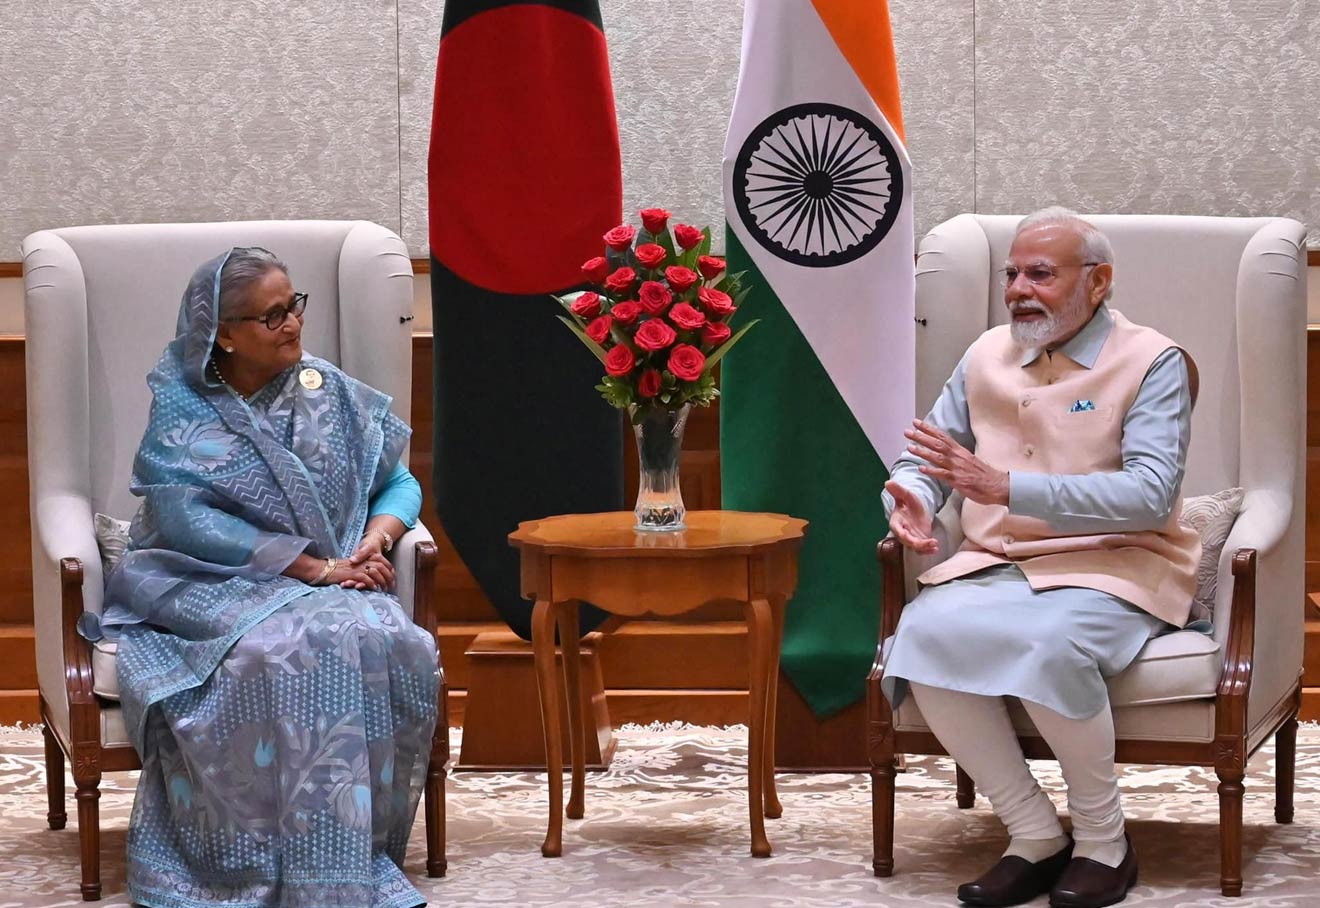 G20 Summit: India Signs 3 MoUs With Bangladesh Including Digital Payment Cooperation